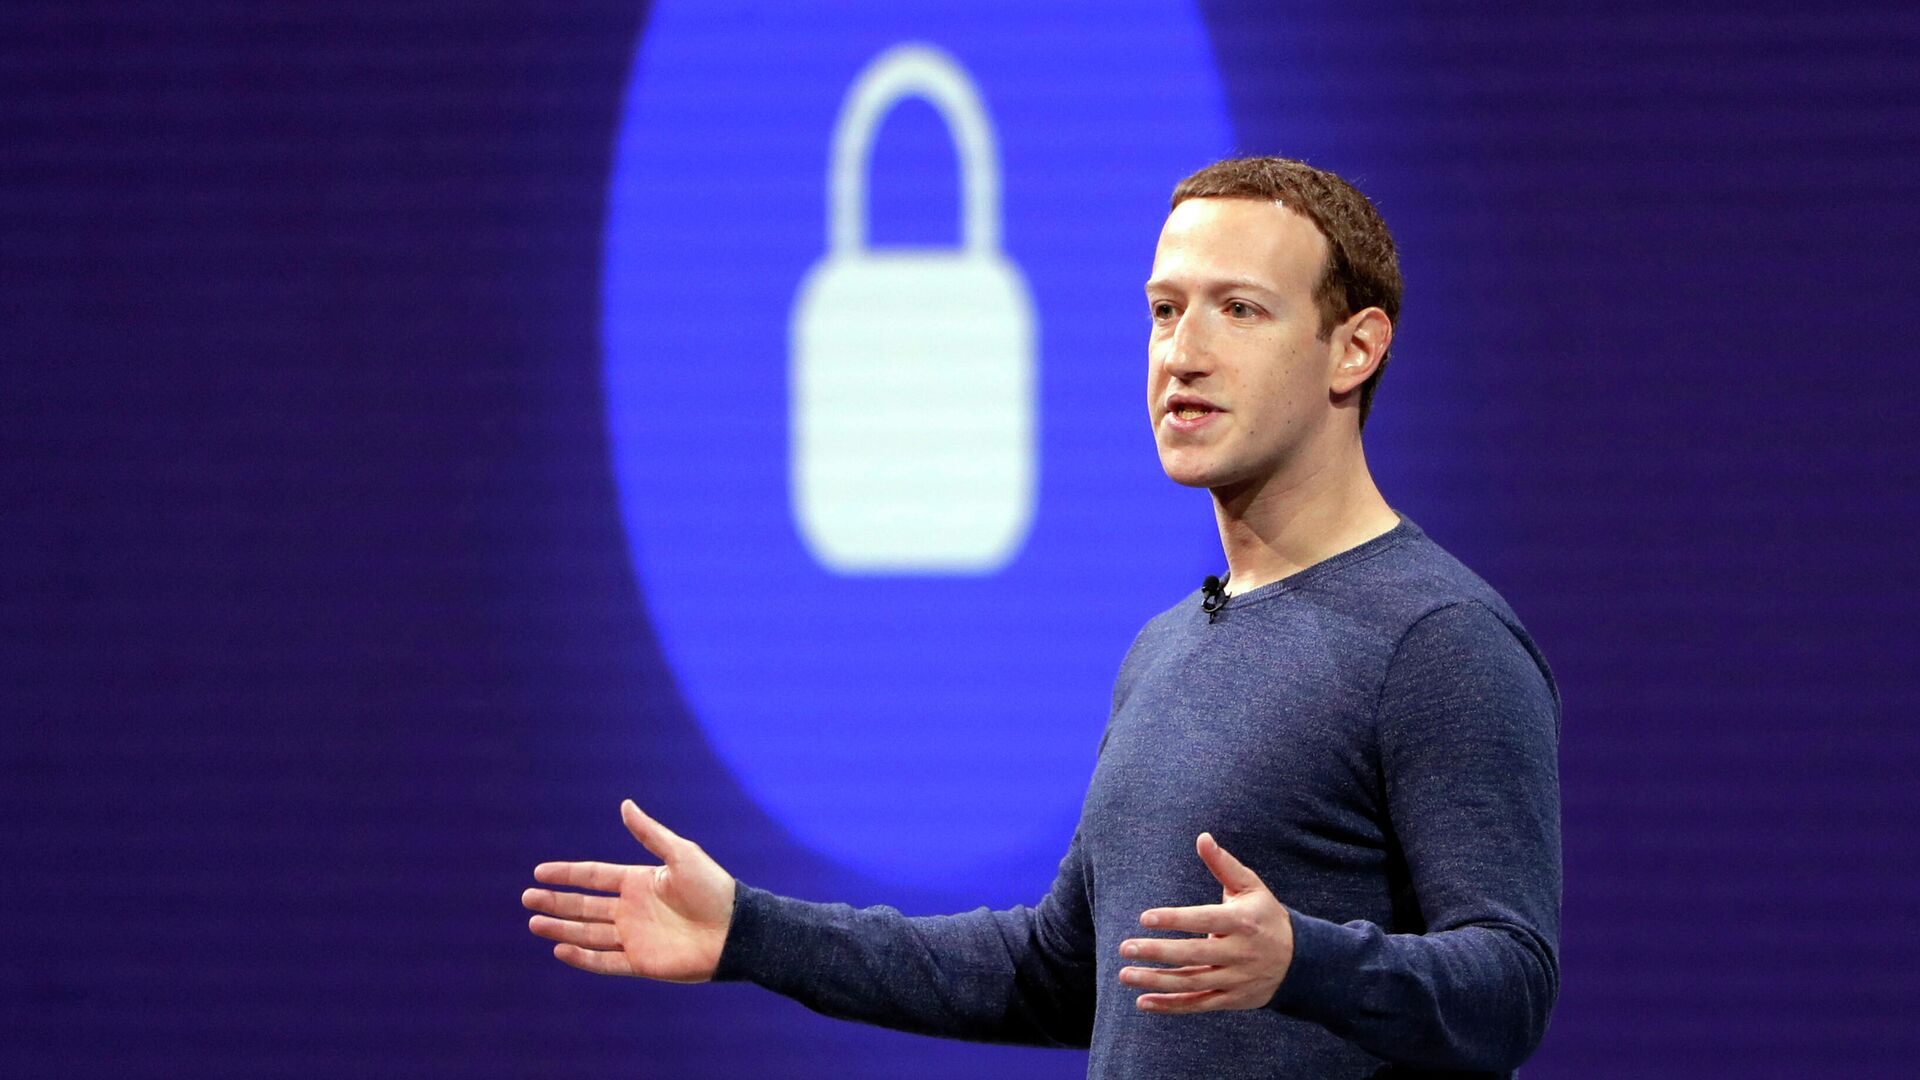 In this May 1, 2018, file photo, Facebook CEO Mark Zuckerberg delivers the keynote speech at F8, Facebook's developer conference, in San Jose, Calif. Sen. Richard Blumenthal, D-Conn., who heads the Senate Commerce subcommittee on consumer protection, called in a sharply worded letter Wednesday, Oct. 20, 2021, for Facebook founder, Zuckerberg, to testify before the panel on Instagram’s effects on children. - Sputnik International, 1920, 24.05.2022